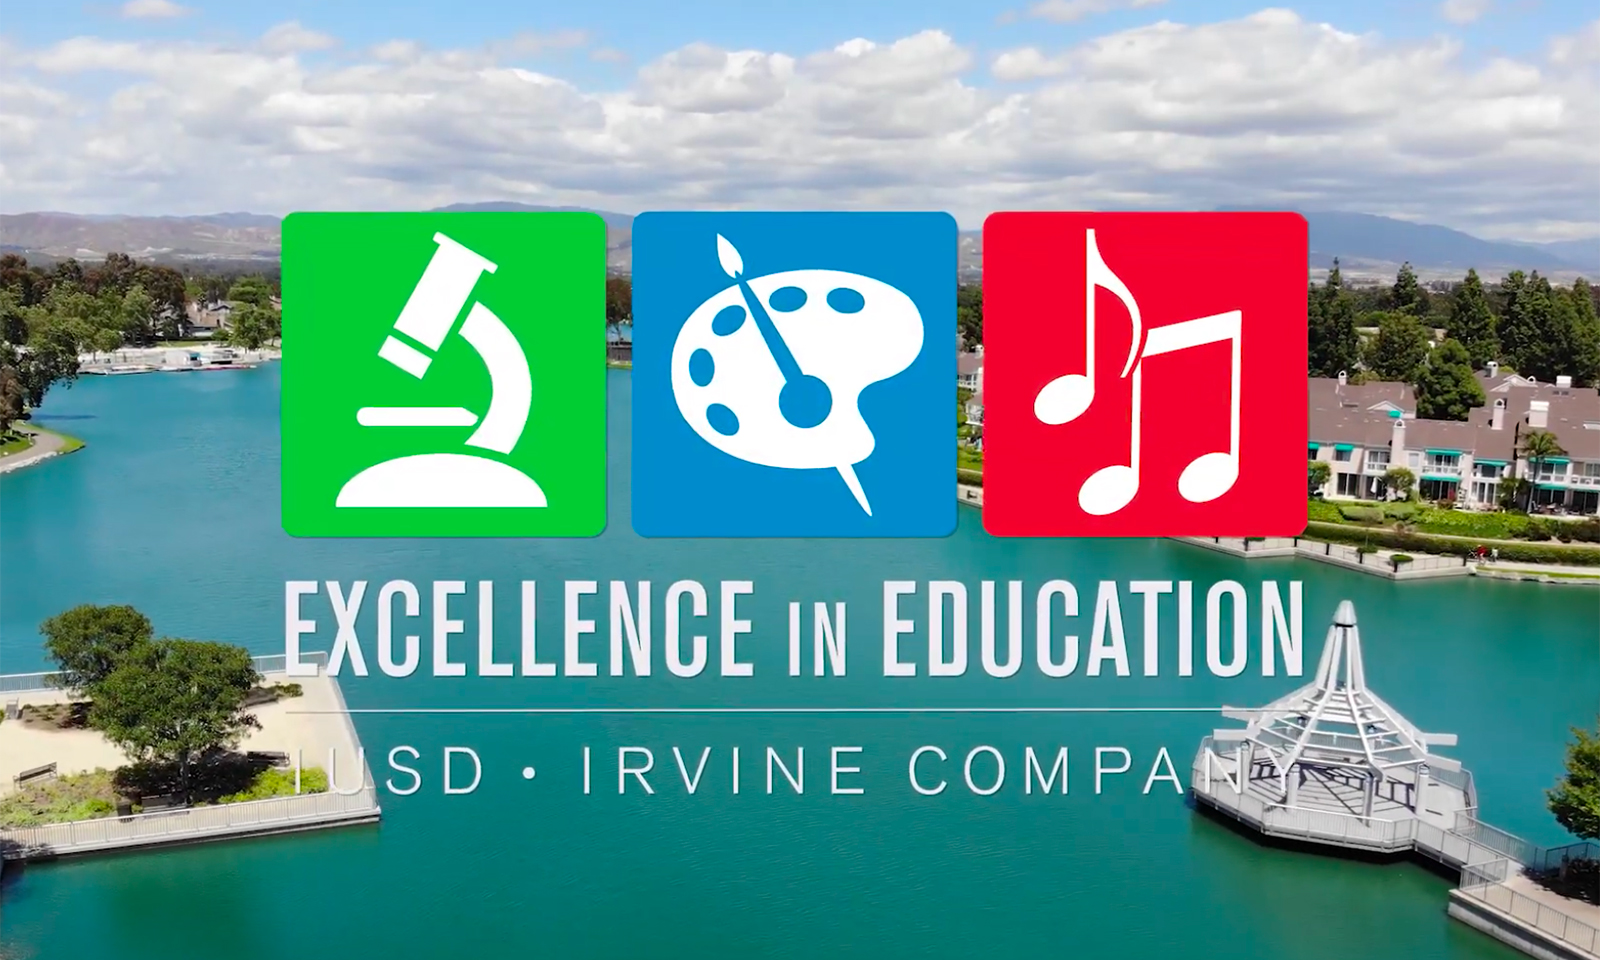 Irvine Company provides $2 million contribution to IUSD in support of arts, music and science education